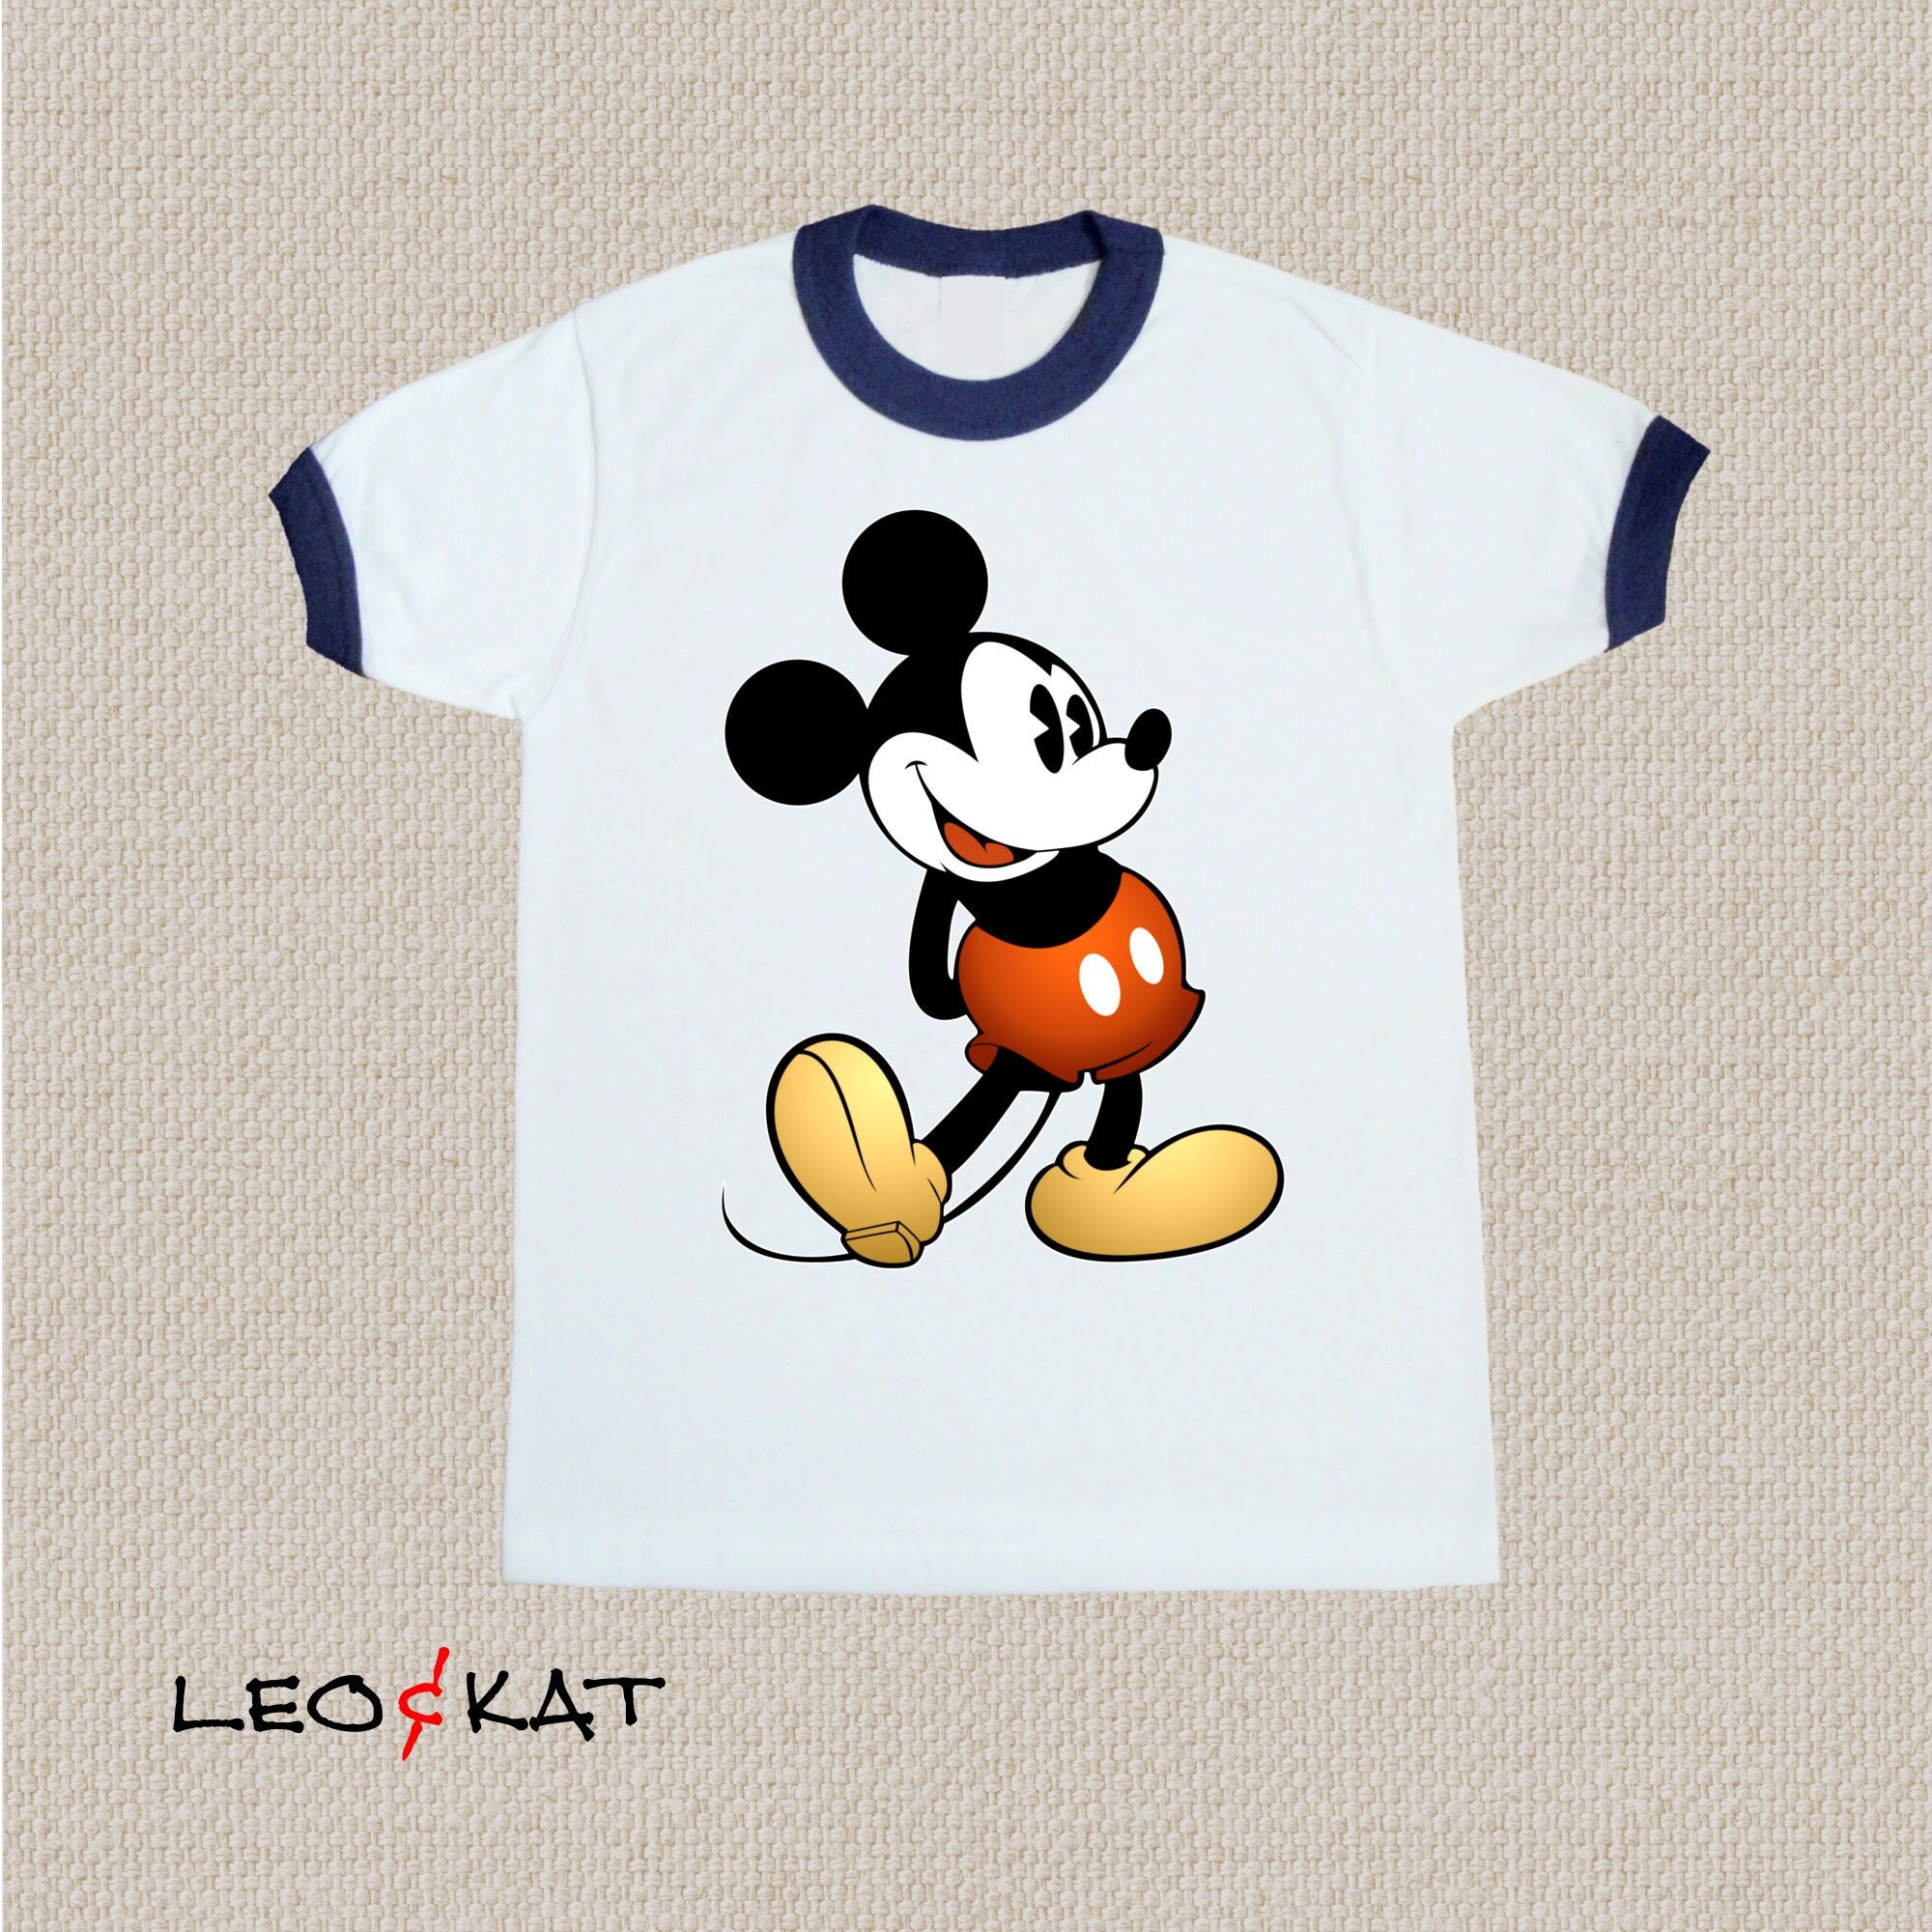 Vintage Mickey to Shirt Up - 60% Off - Etsy Mouse